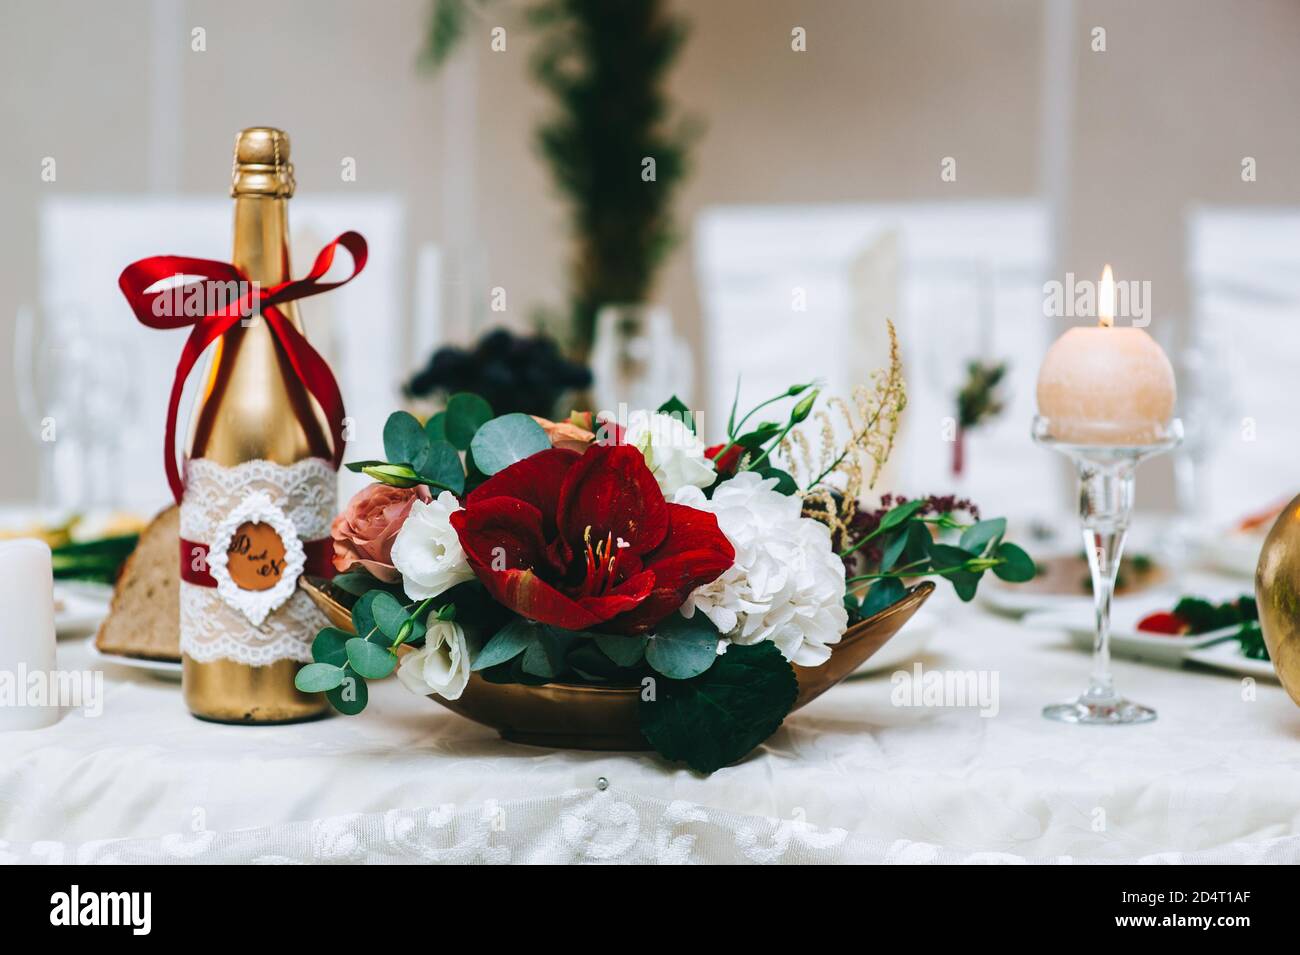 Close up of a flower arrangement in red tones in a gold stand stands on a table. Stock Photo